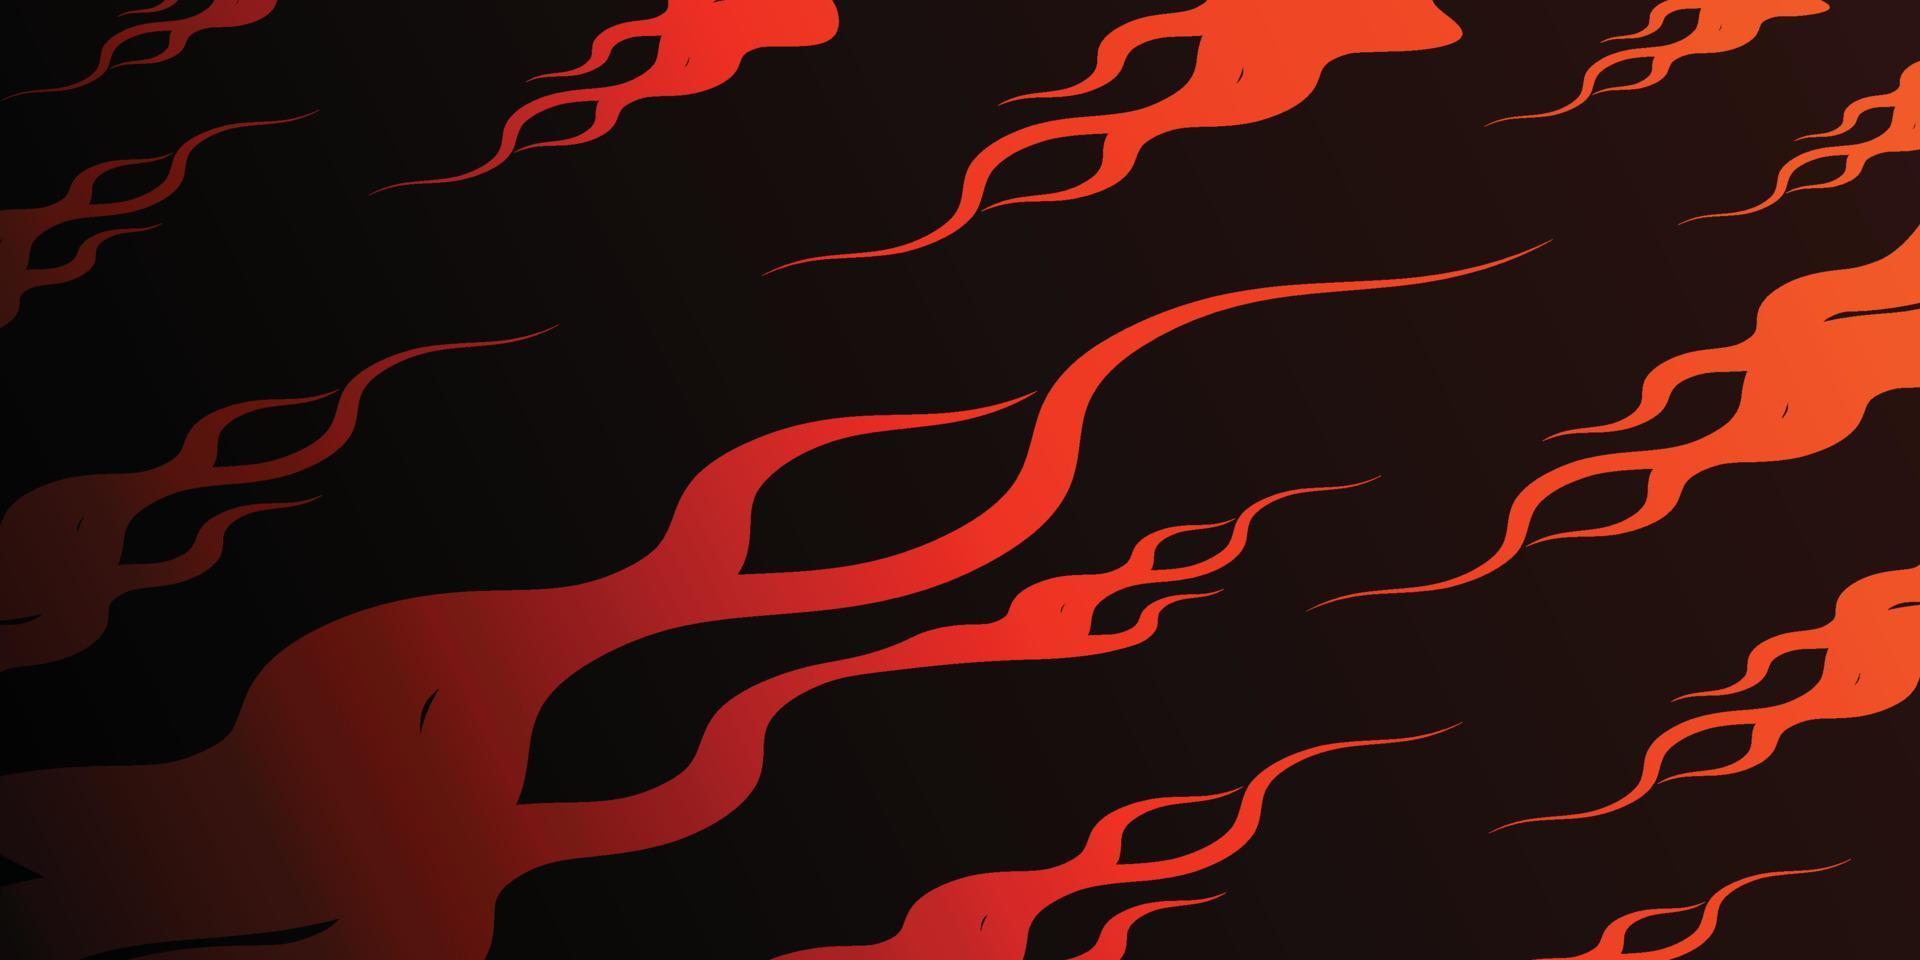 Fire Background, you can use as needed vector